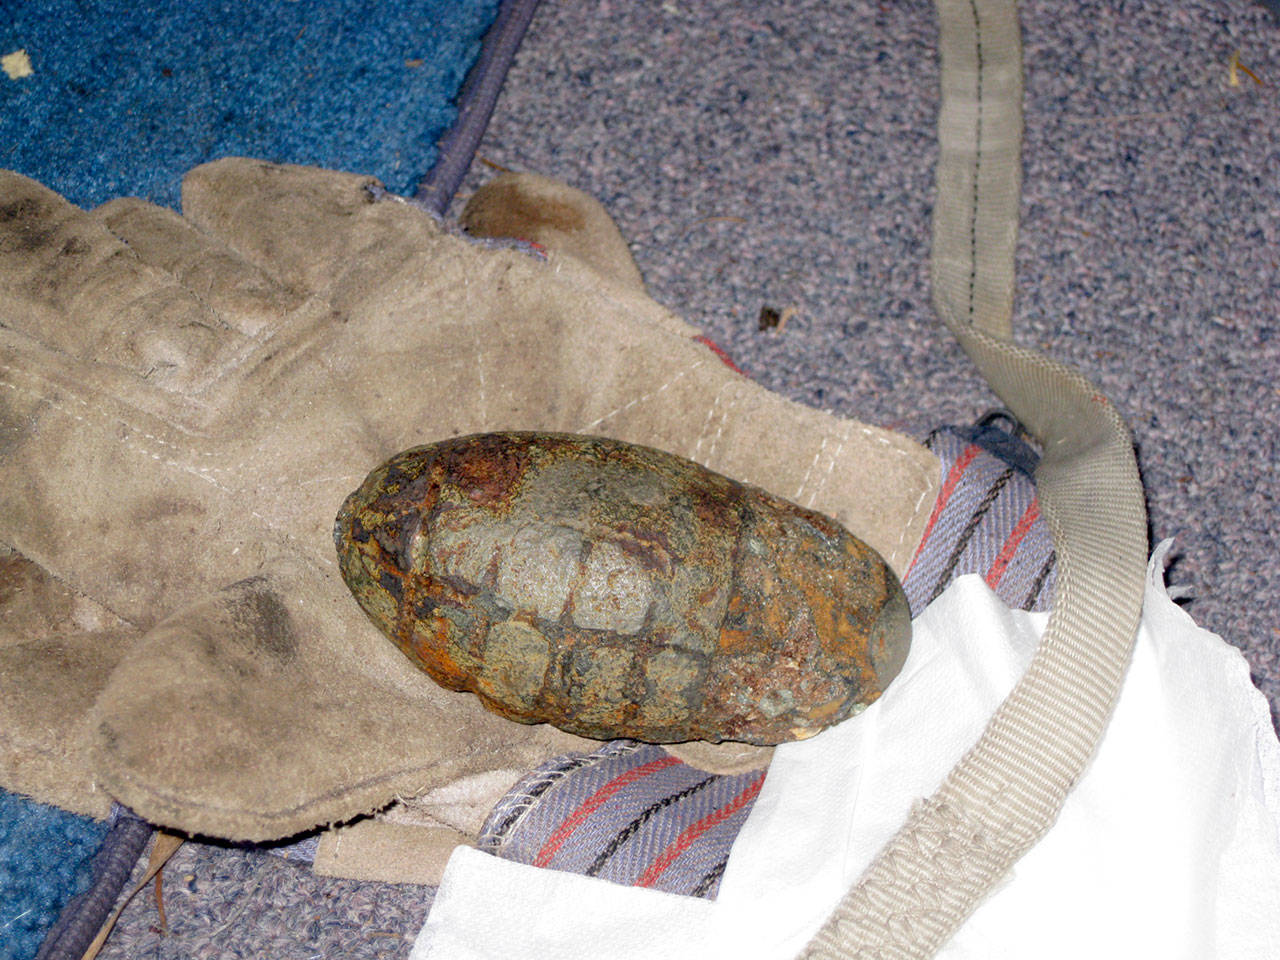 This World War II-era grenade was found partially buried on the beach at Fort Worden State Park. (Port Townsend Police Department)